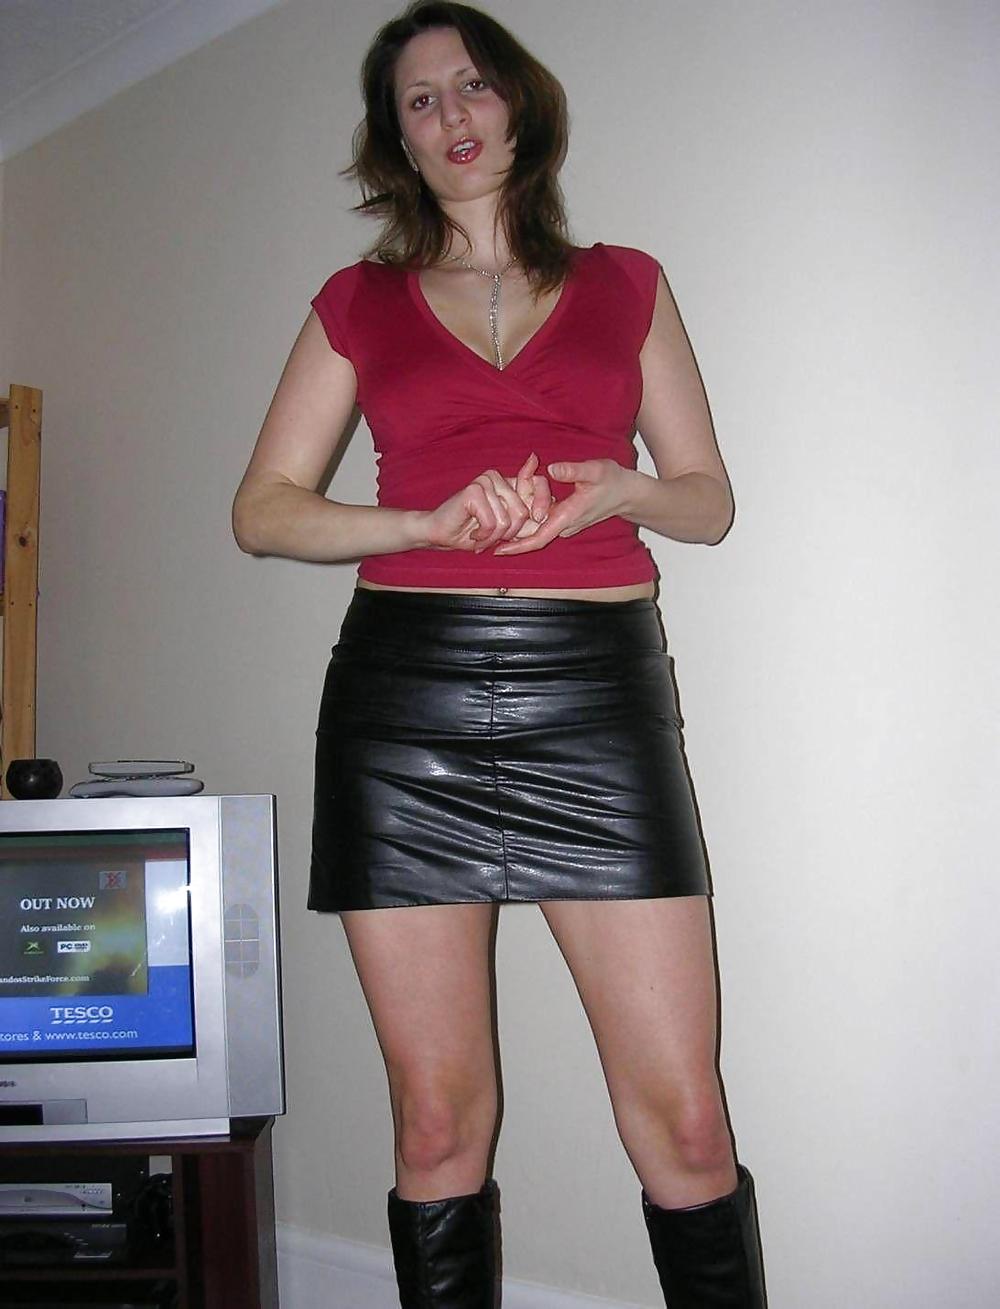 Leather Female Amateur Porn - See and Save As hotlegs latex and leather skirt amateurs porn pict -  4crot.com